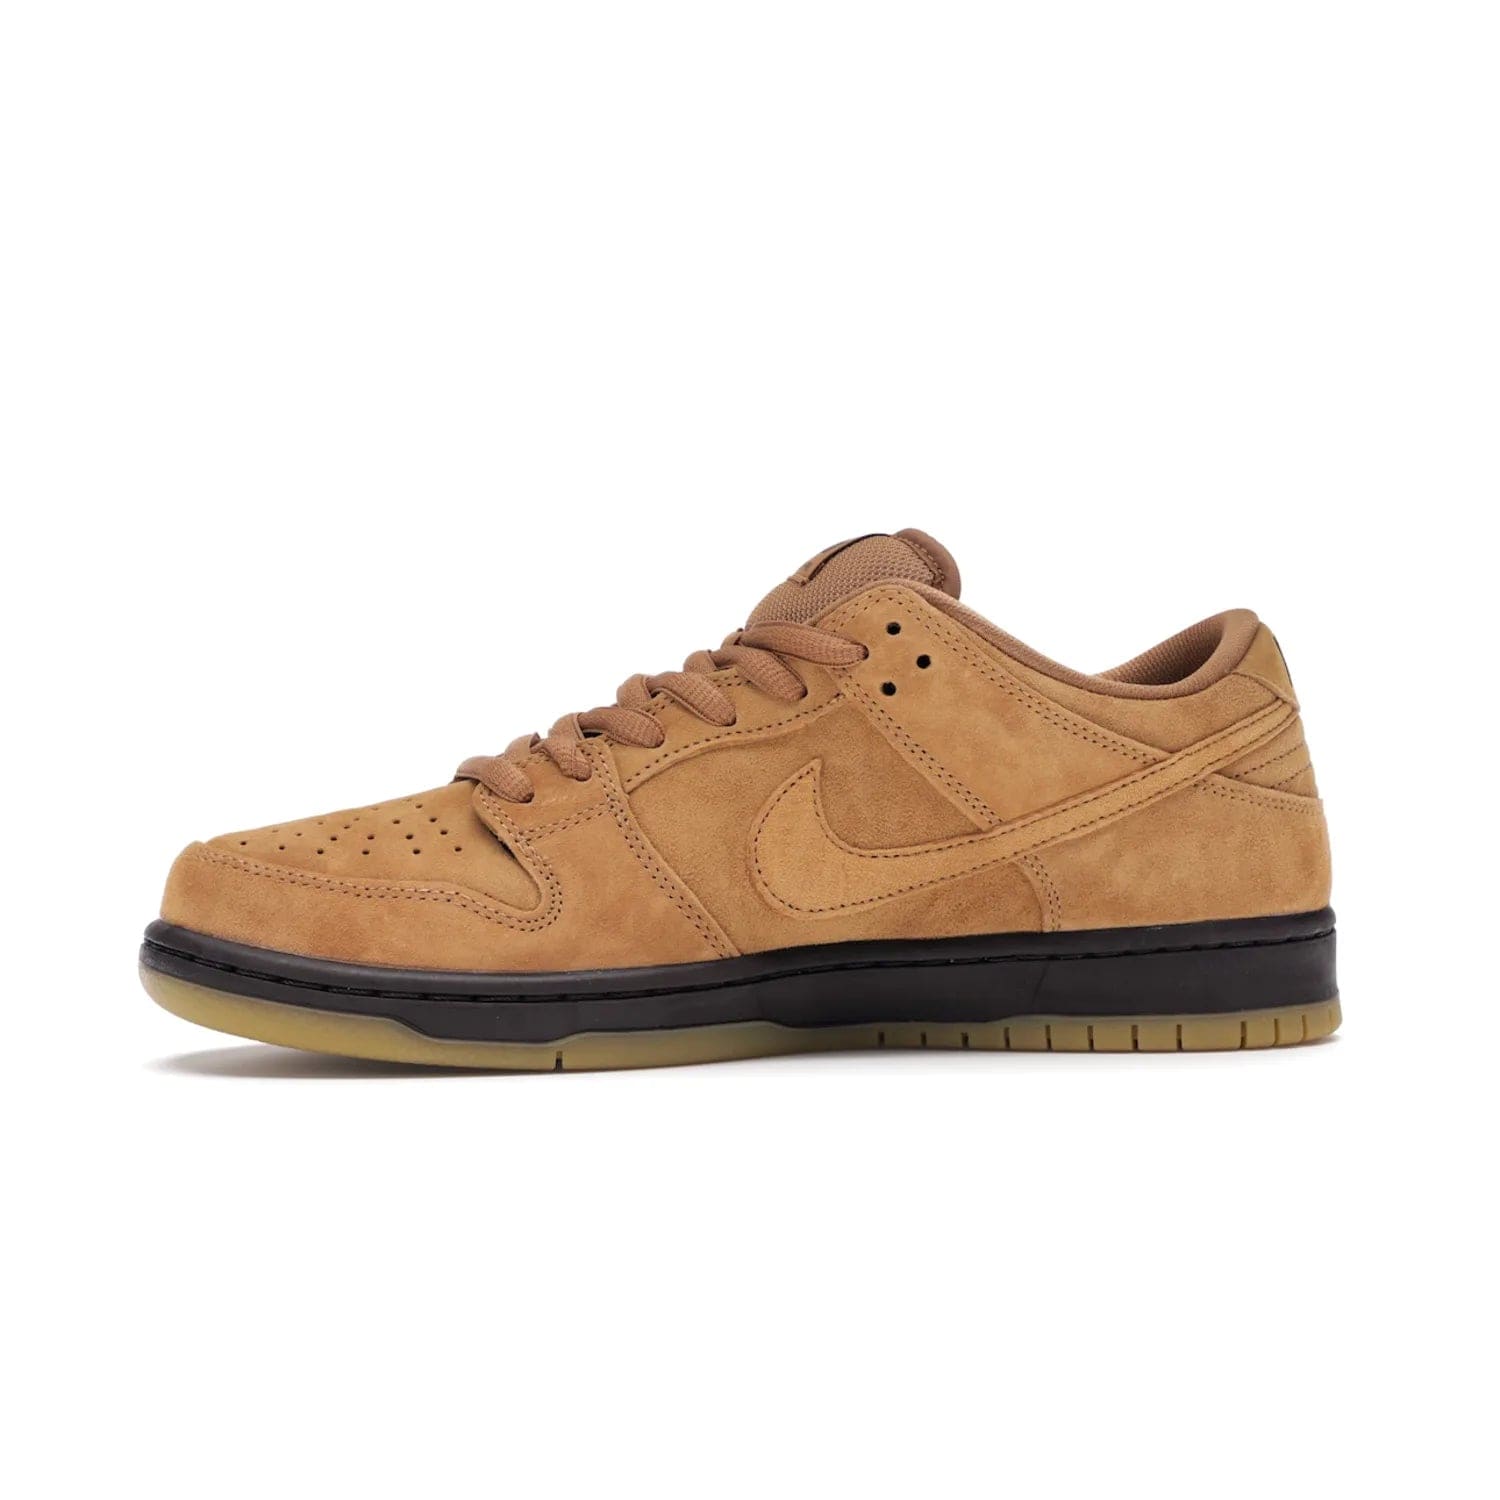 Nike SB Dunk Low Wheat (2021/2023) - Image 18 - Only at www.BallersClubKickz.com - The Nike SB Dunk Low Wheat (2021/2023)has a sleek silhouette and wheat suede upper. Tan tones for lining, mesh tongues, and laces. Iconic color palette midsole, perforated boxing toe. Brown branding on tongue and heel. Gum rubber outsole with partitioned pattern for traction. Eschewed in Feb 2021 for $110.